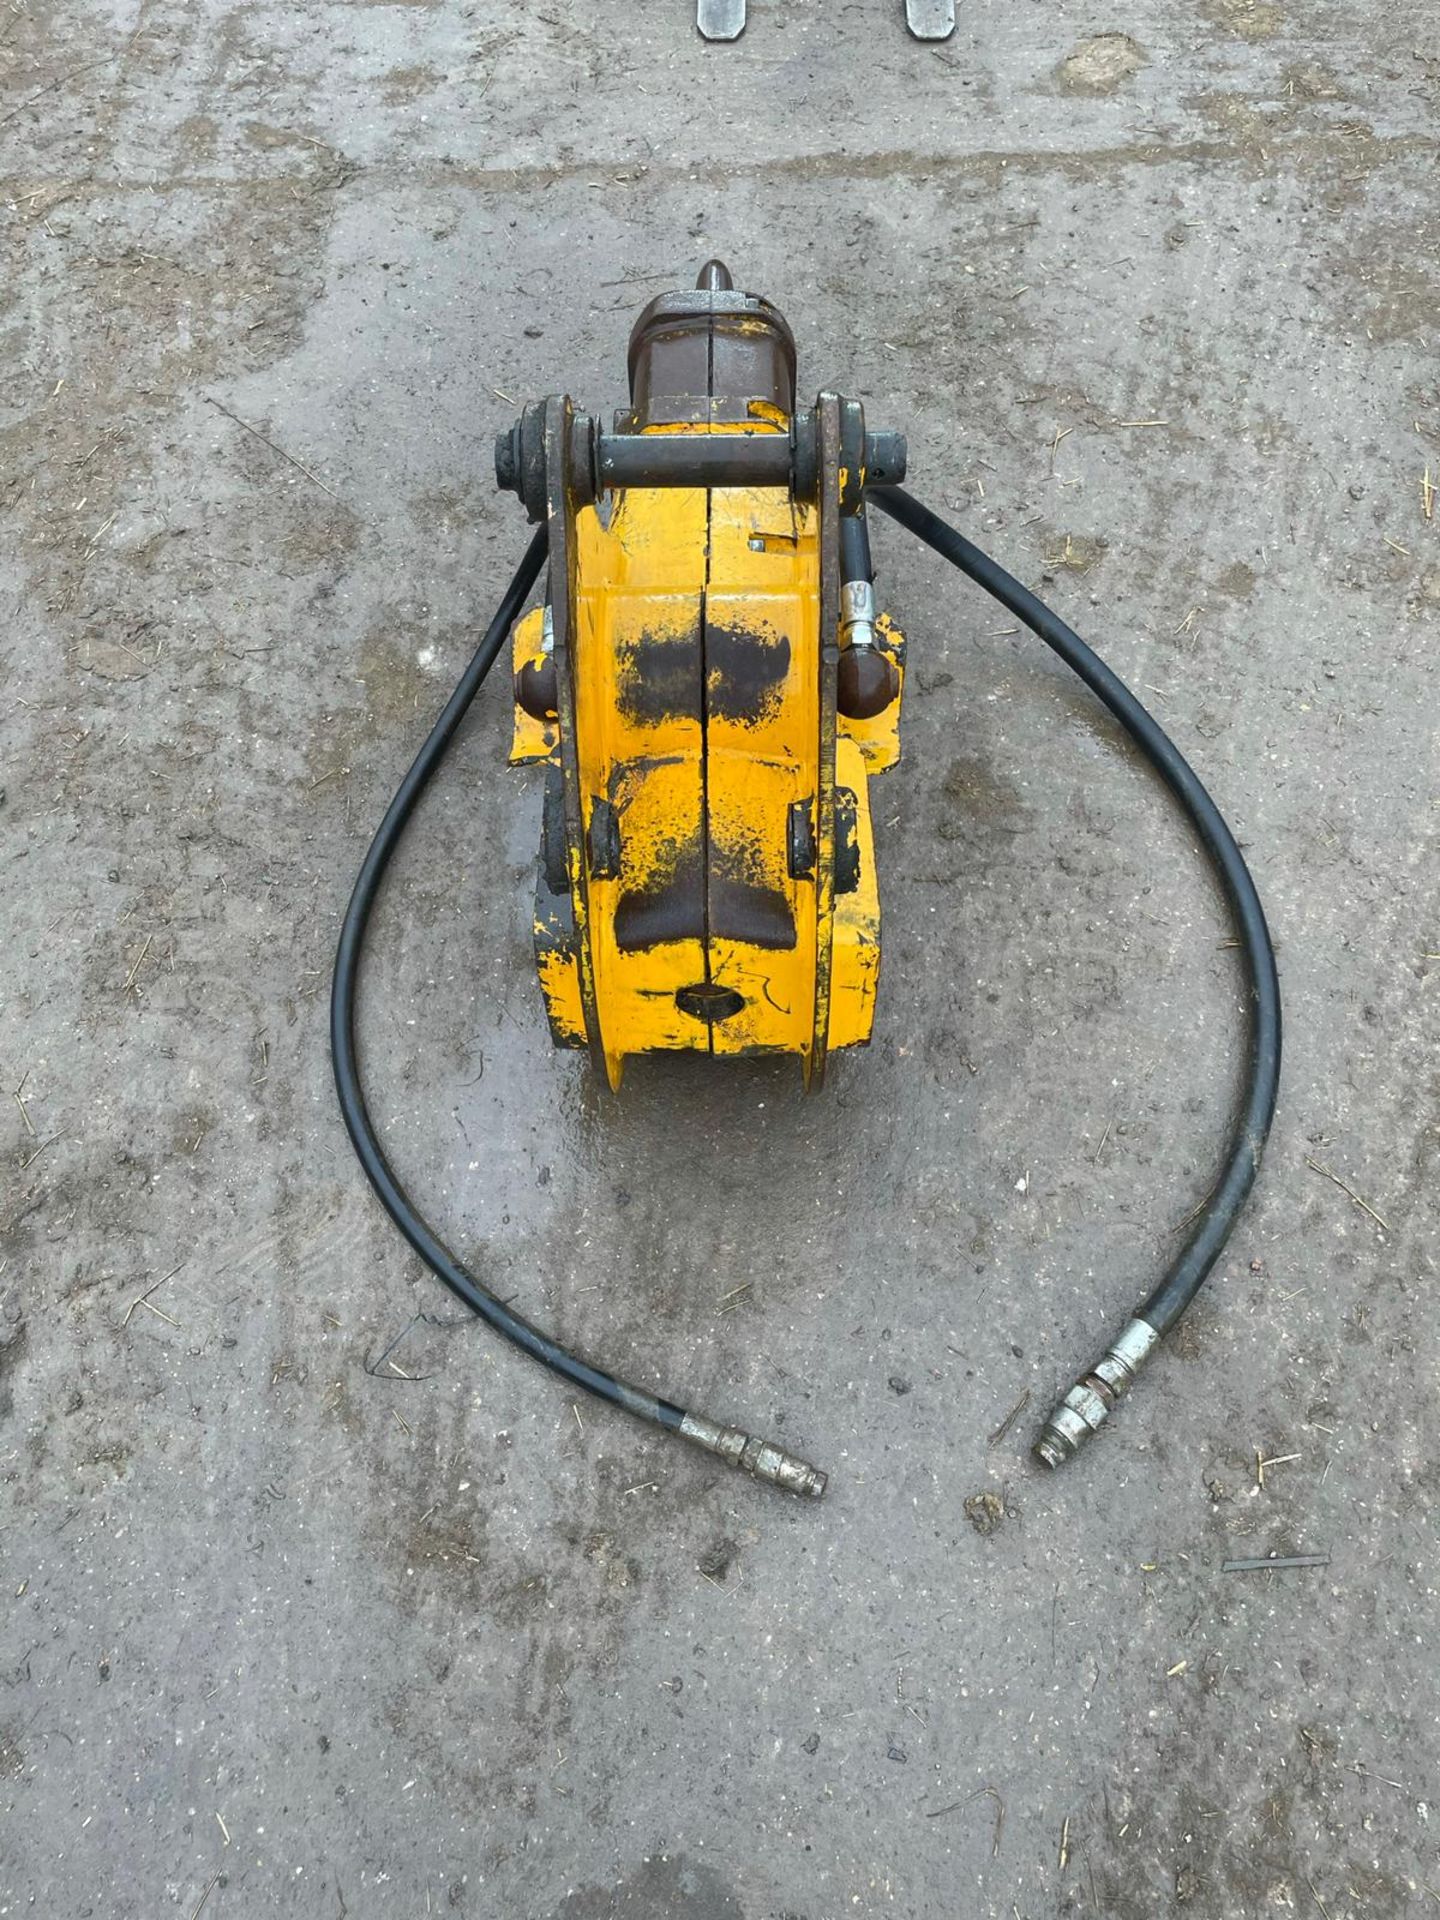 JCB HAMMERMASTER 3600 ROCK BREAKER, 45mm PINS, CHISEL AND PIPES ARE INCLUDED, DIRECT FROM COUNCIL - Image 6 of 7